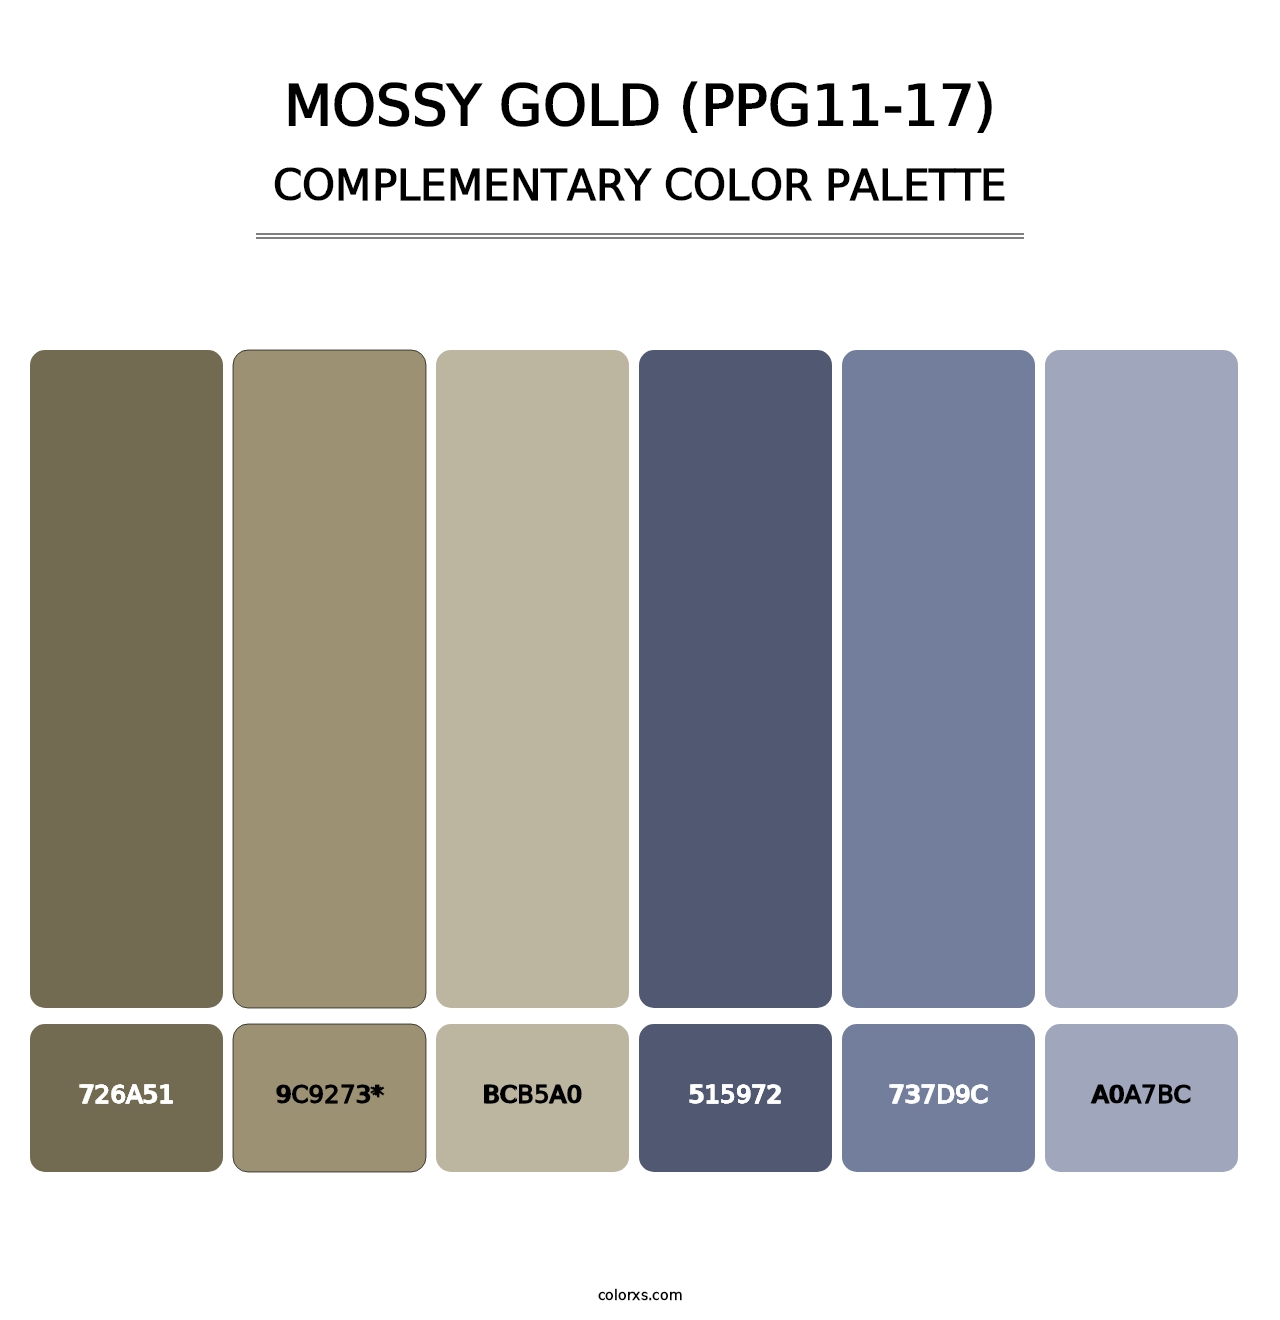 Mossy Gold (PPG11-17) - Complementary Color Palette